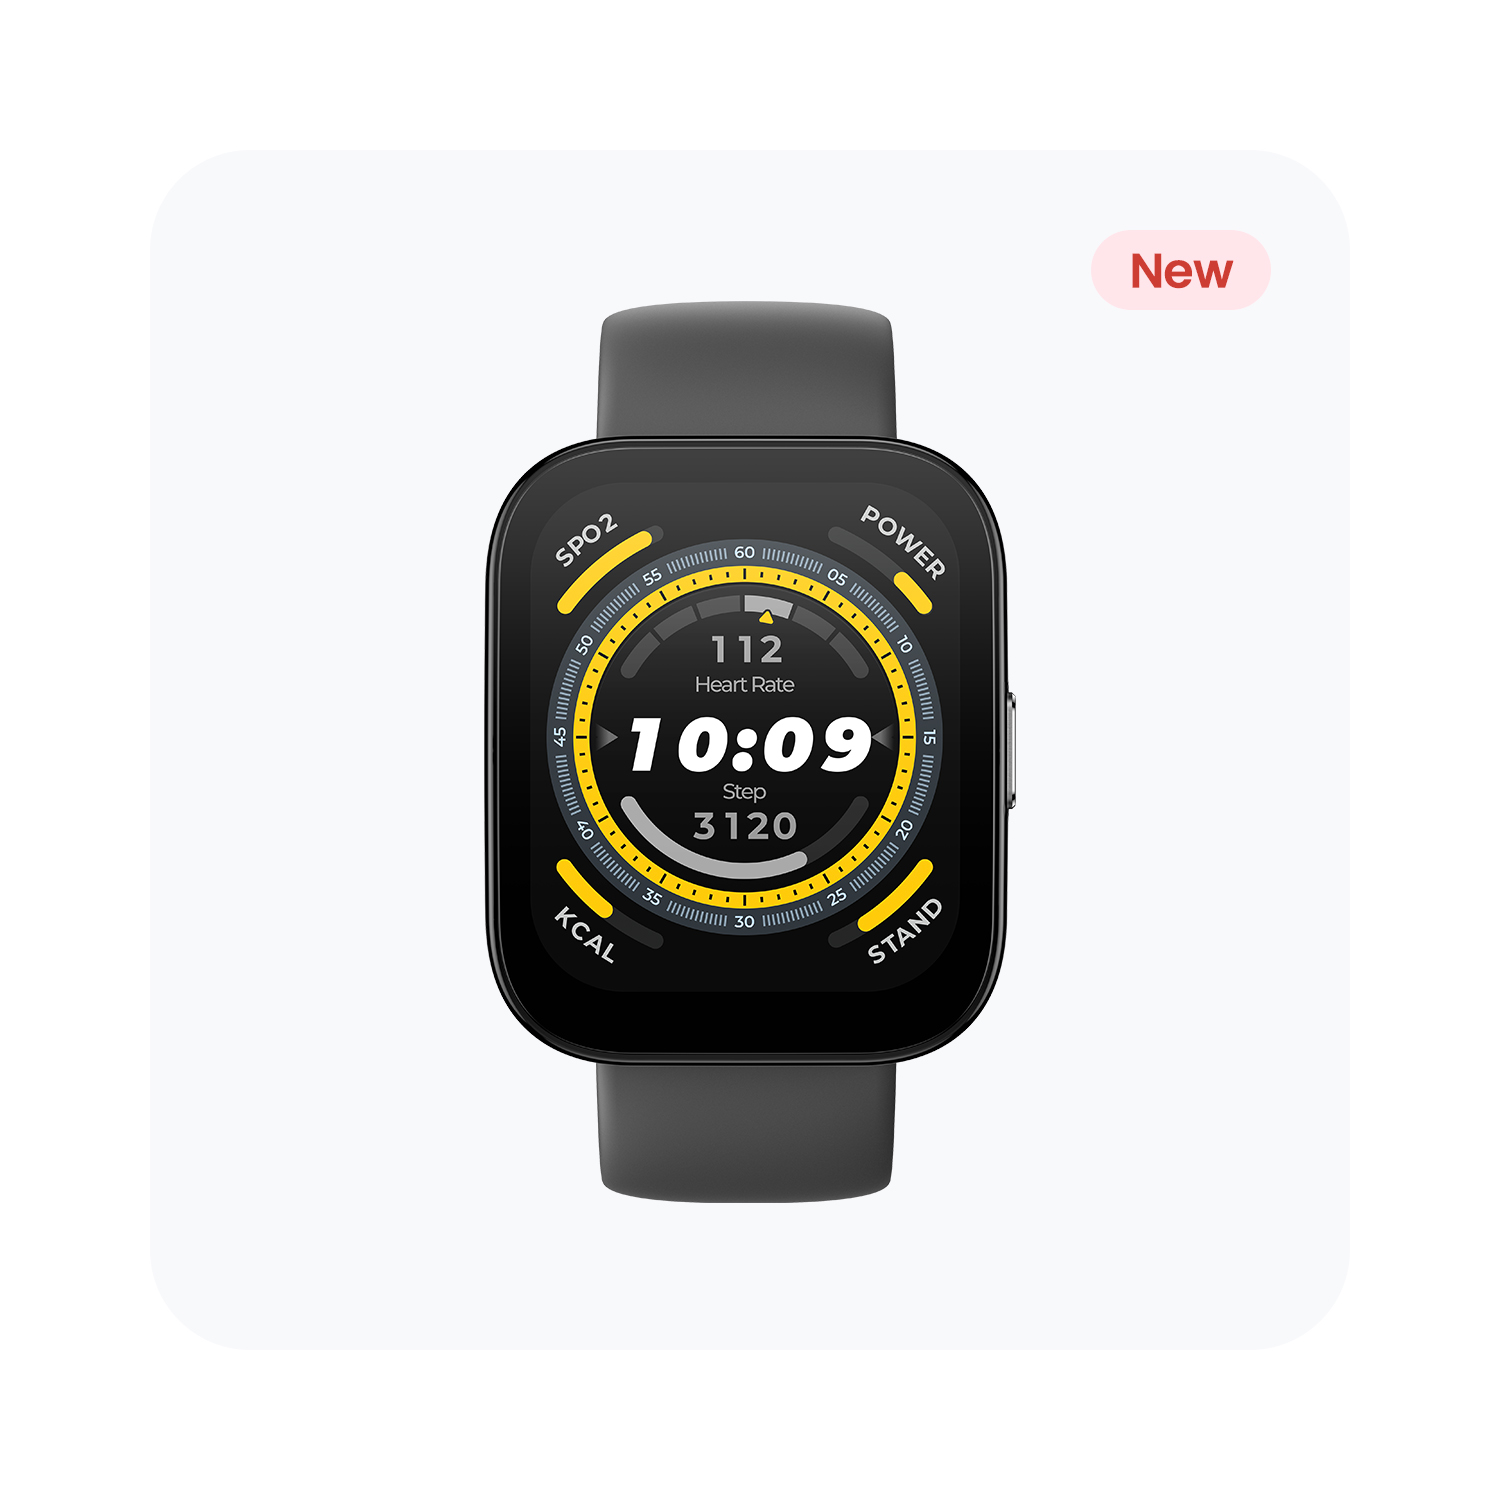  Amazfit Bip 3 Pro Smart Watch, Step Tracking, Heart Rate  Monitor, Blood Oxygen Measurement, Alexa Built-In, GPS, 14-Day Battery  Life, Sleep Quality Analysis, Customizable Watch Faces (Black) : Cell  Phones 